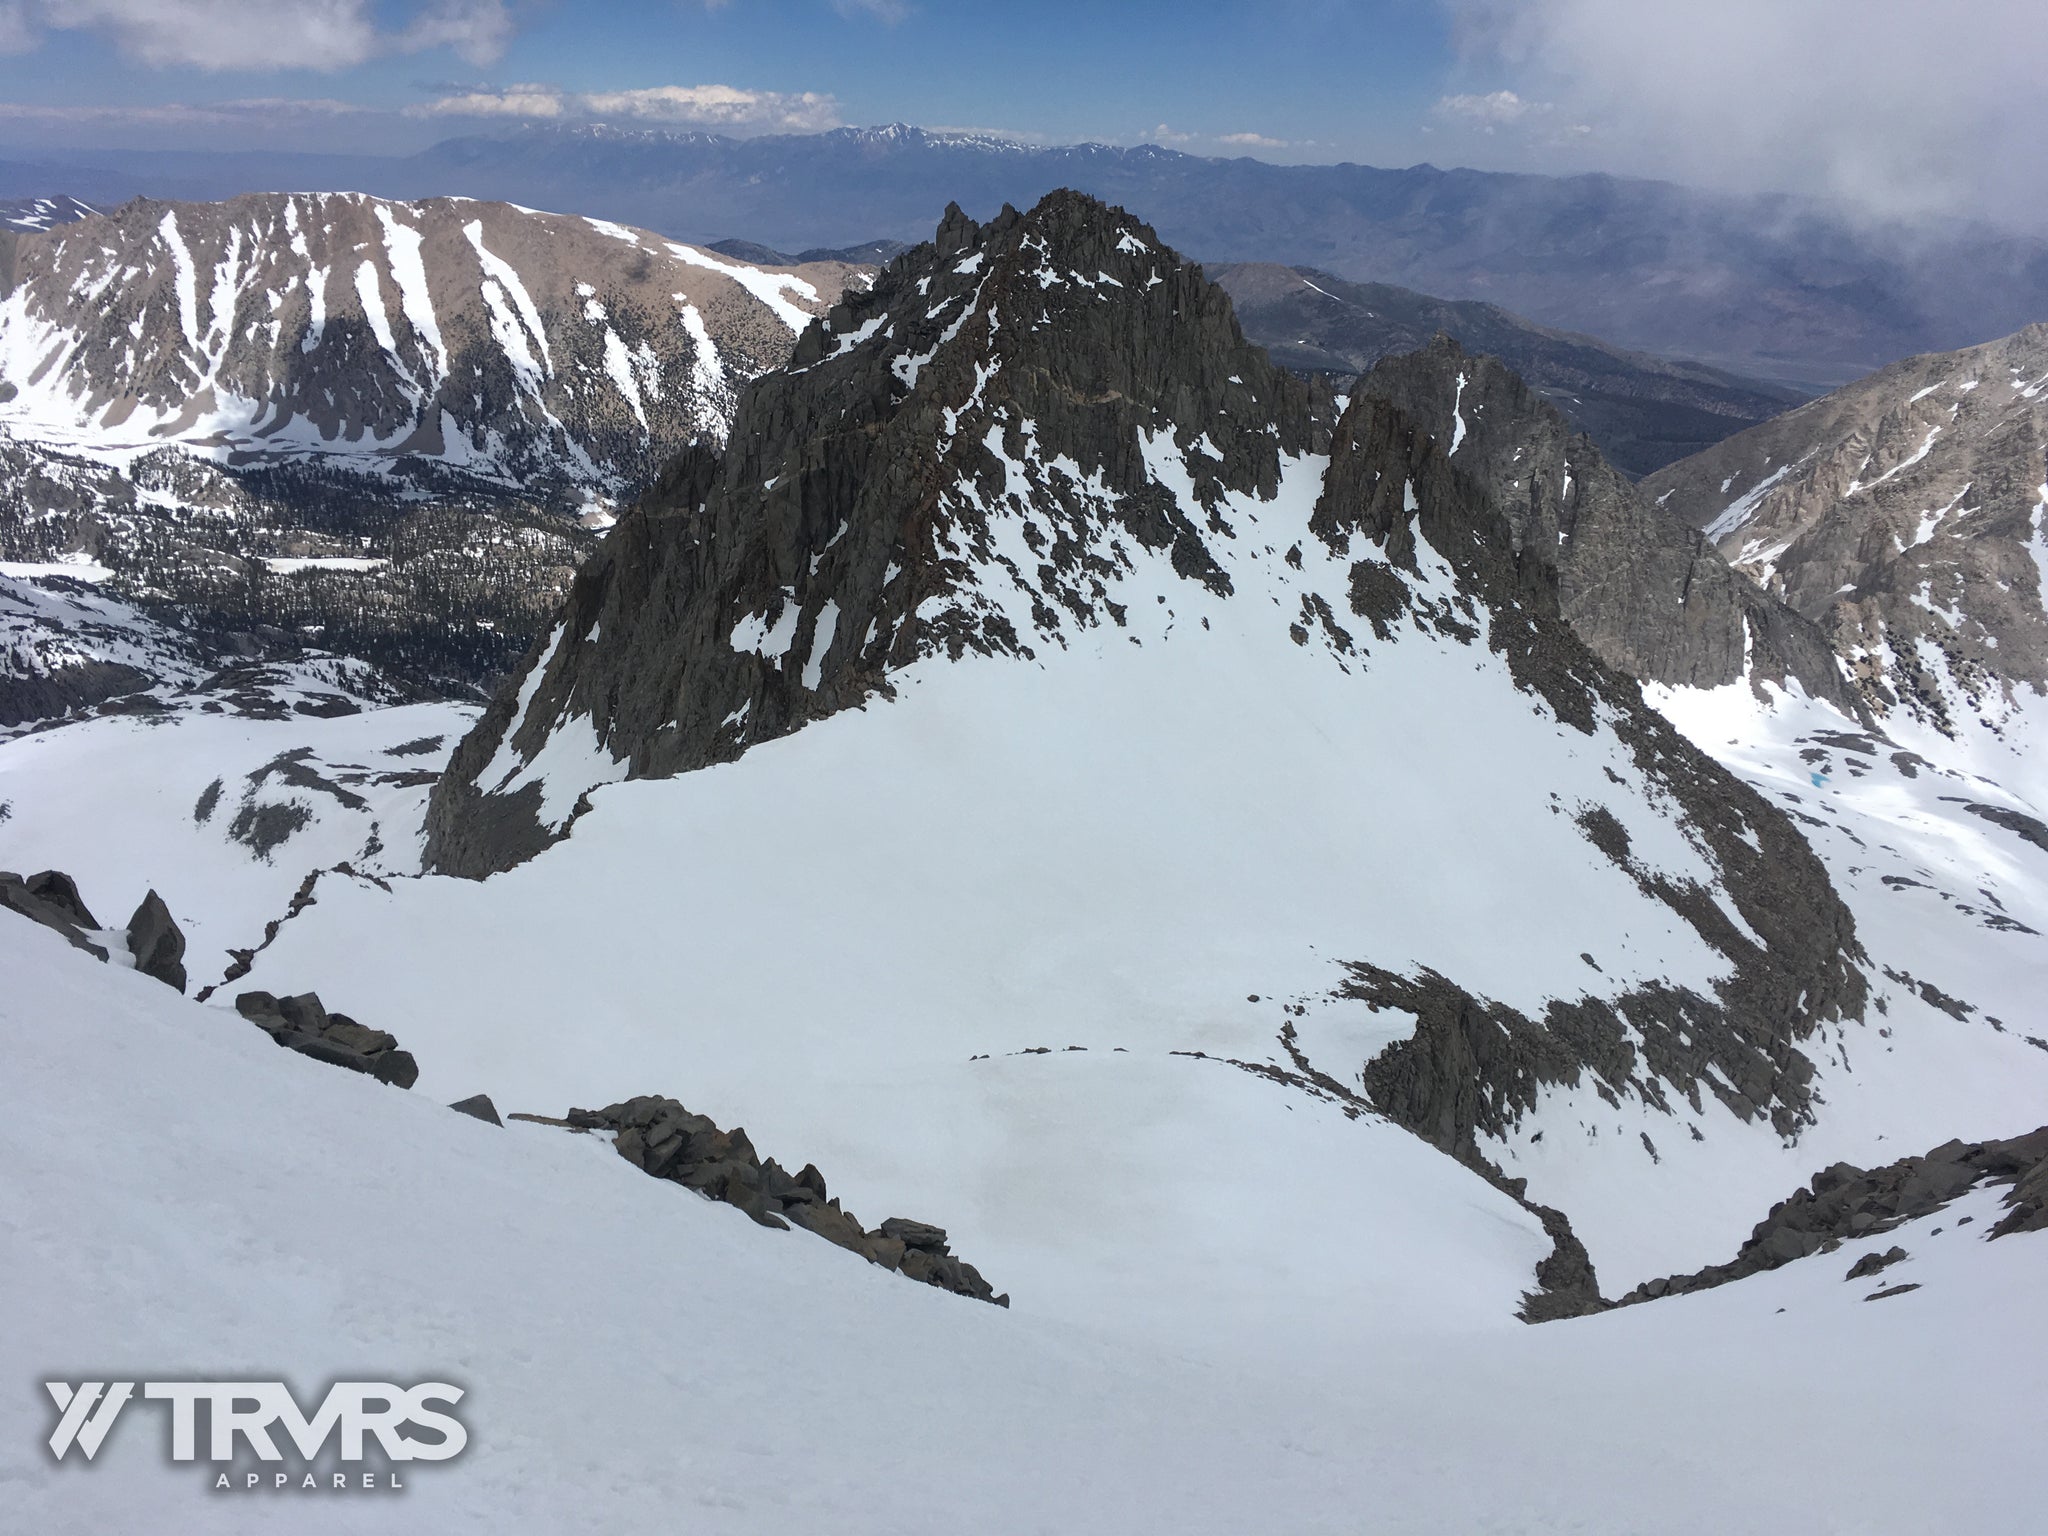 View from Mount Sill's North Couloir - North Fork, Mount Gayley, Contact Pass | TRVRS APPAREL